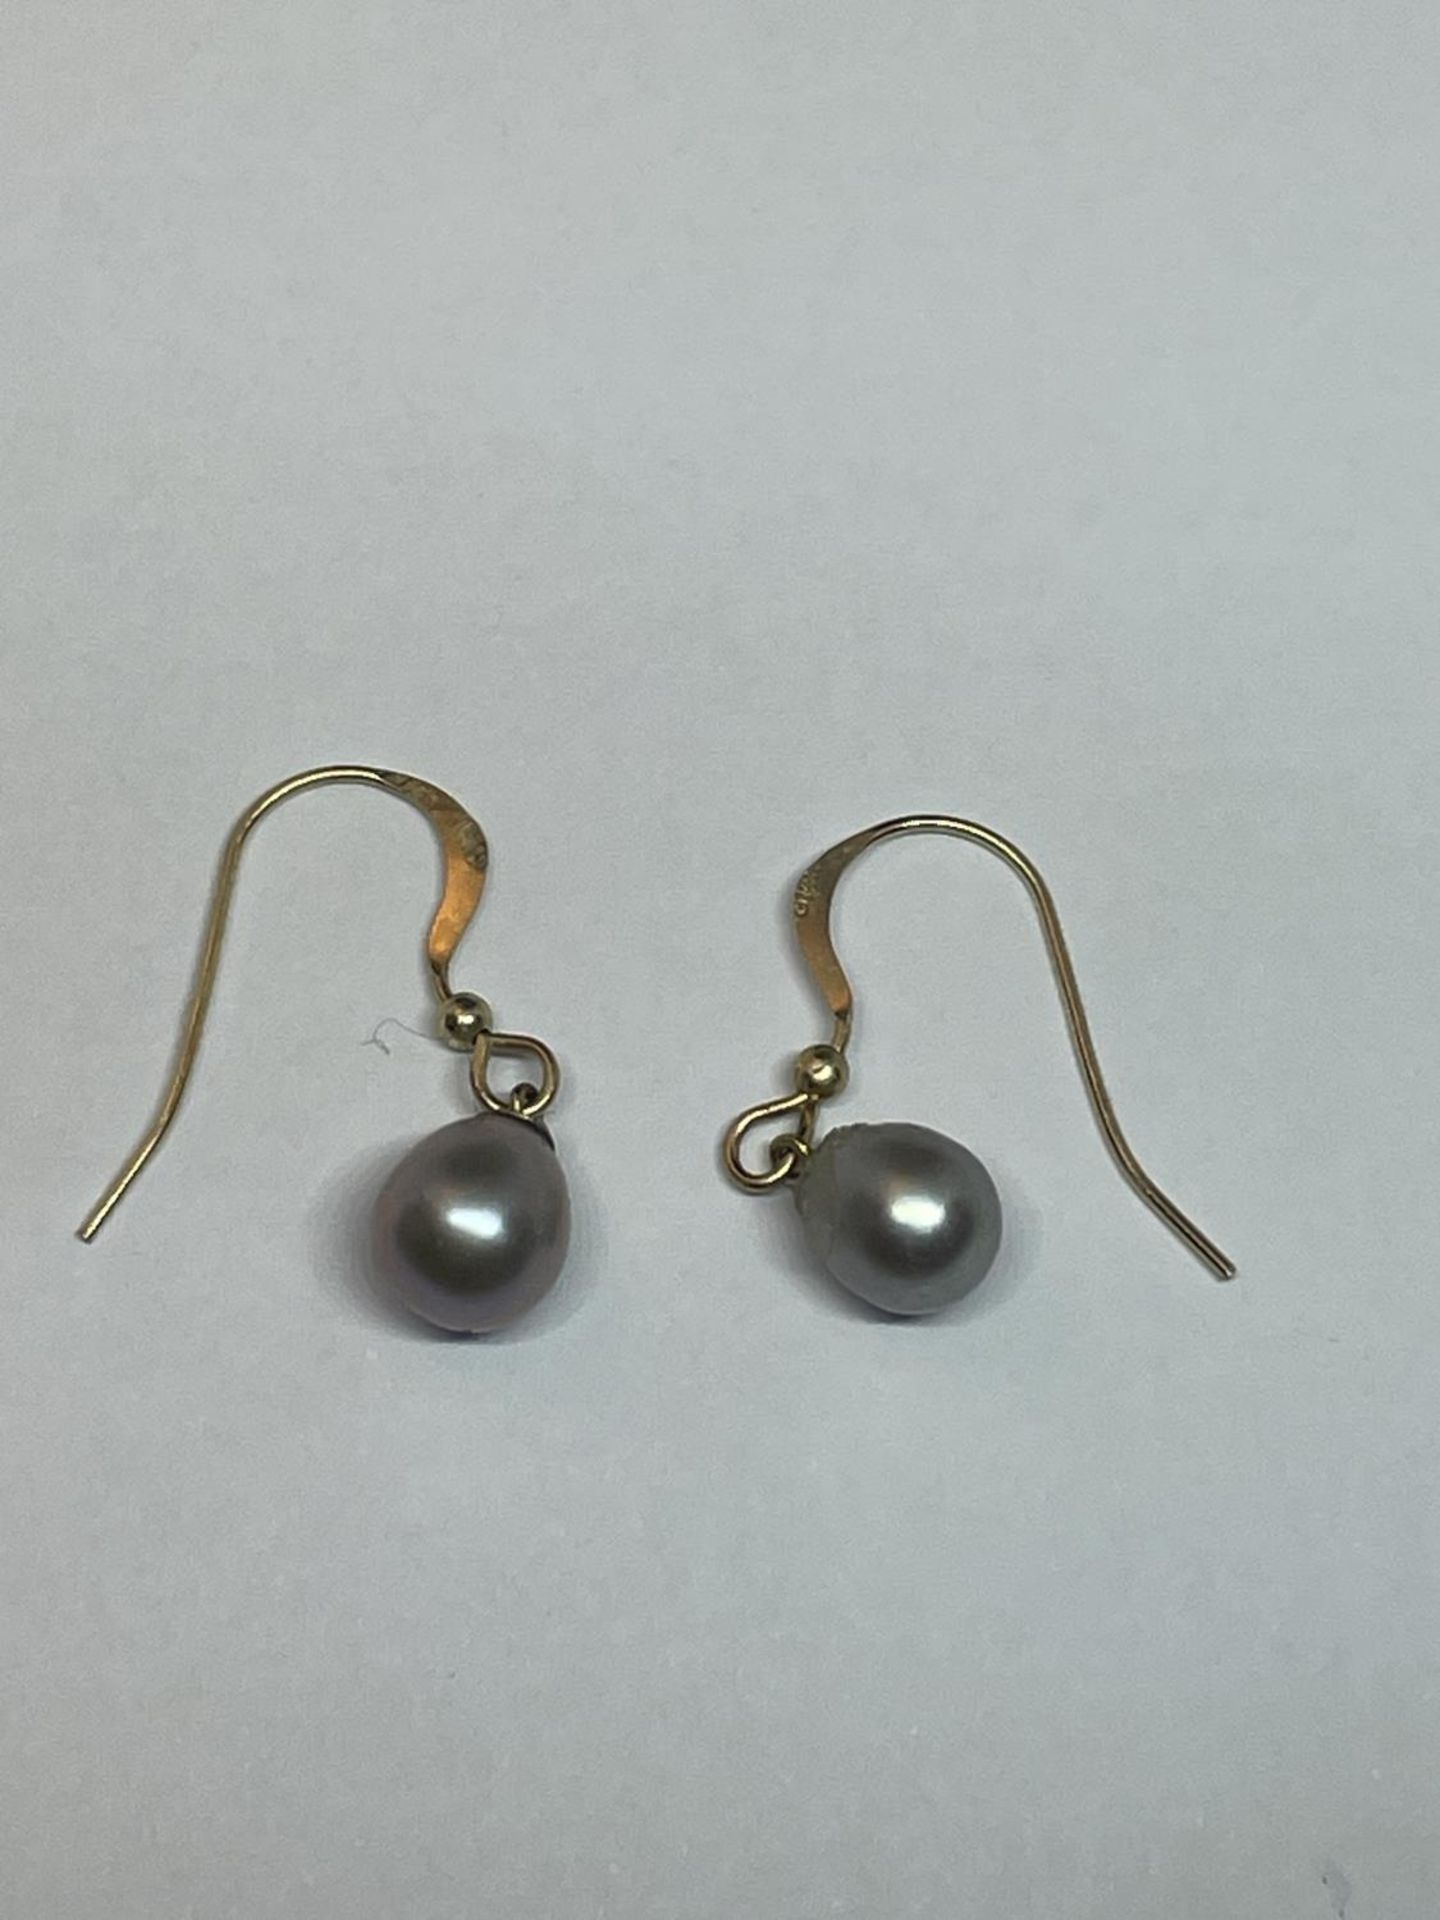 A PAIR OF 14 CARAT GOLD AND PEARL EARRINGS GROSS WEIGHT 1.28 GRAMS